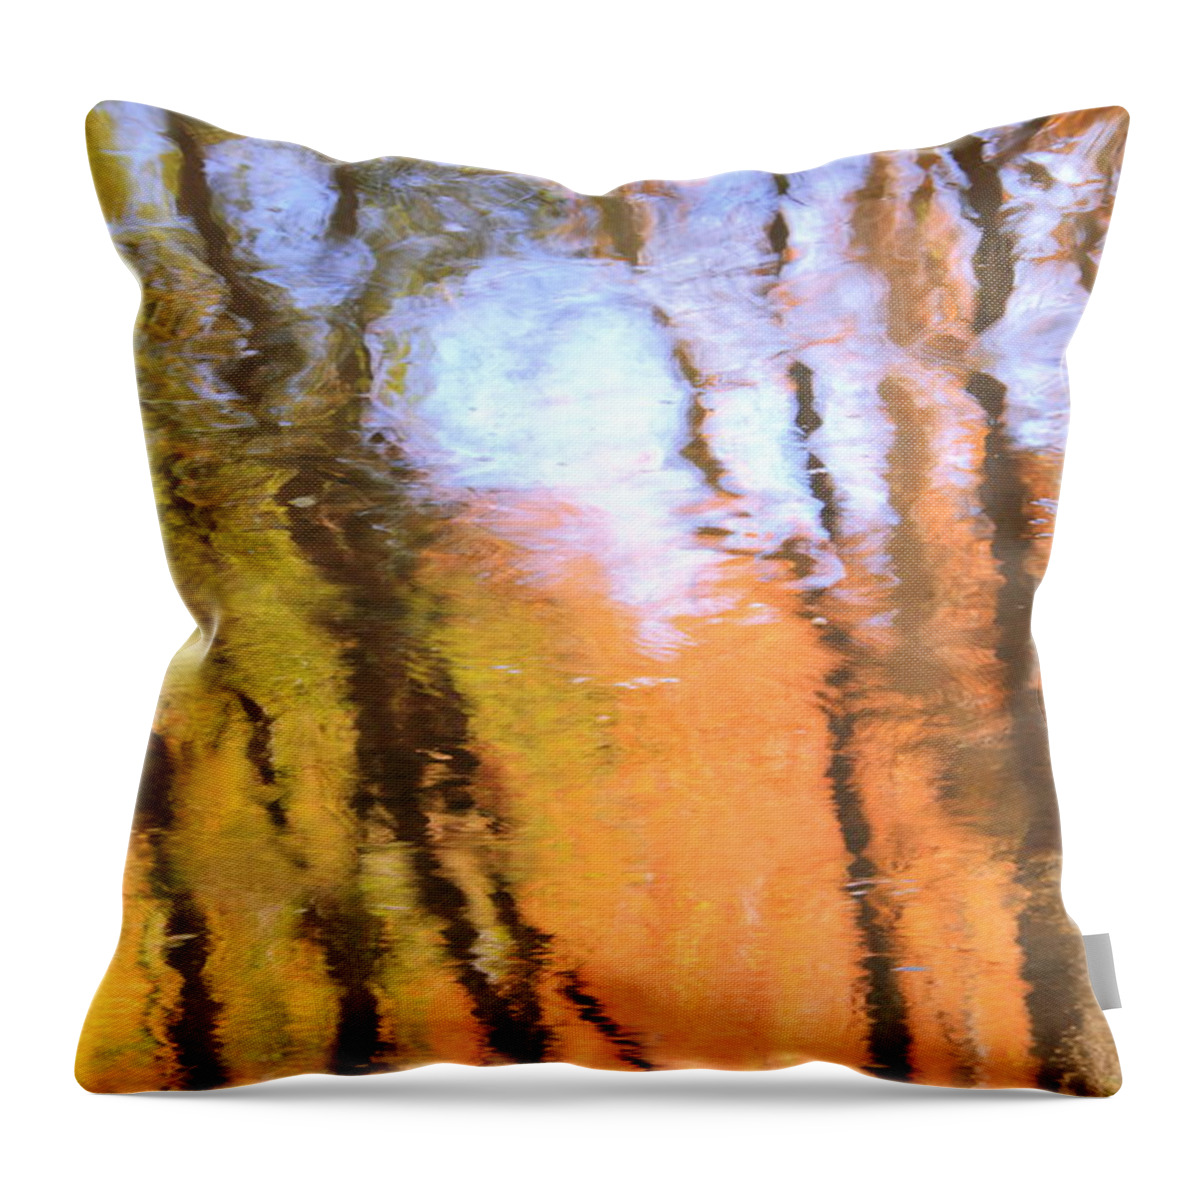 Landscape Throw Pillow featuring the photograph Oak Creek Reflections by Roupen Baker